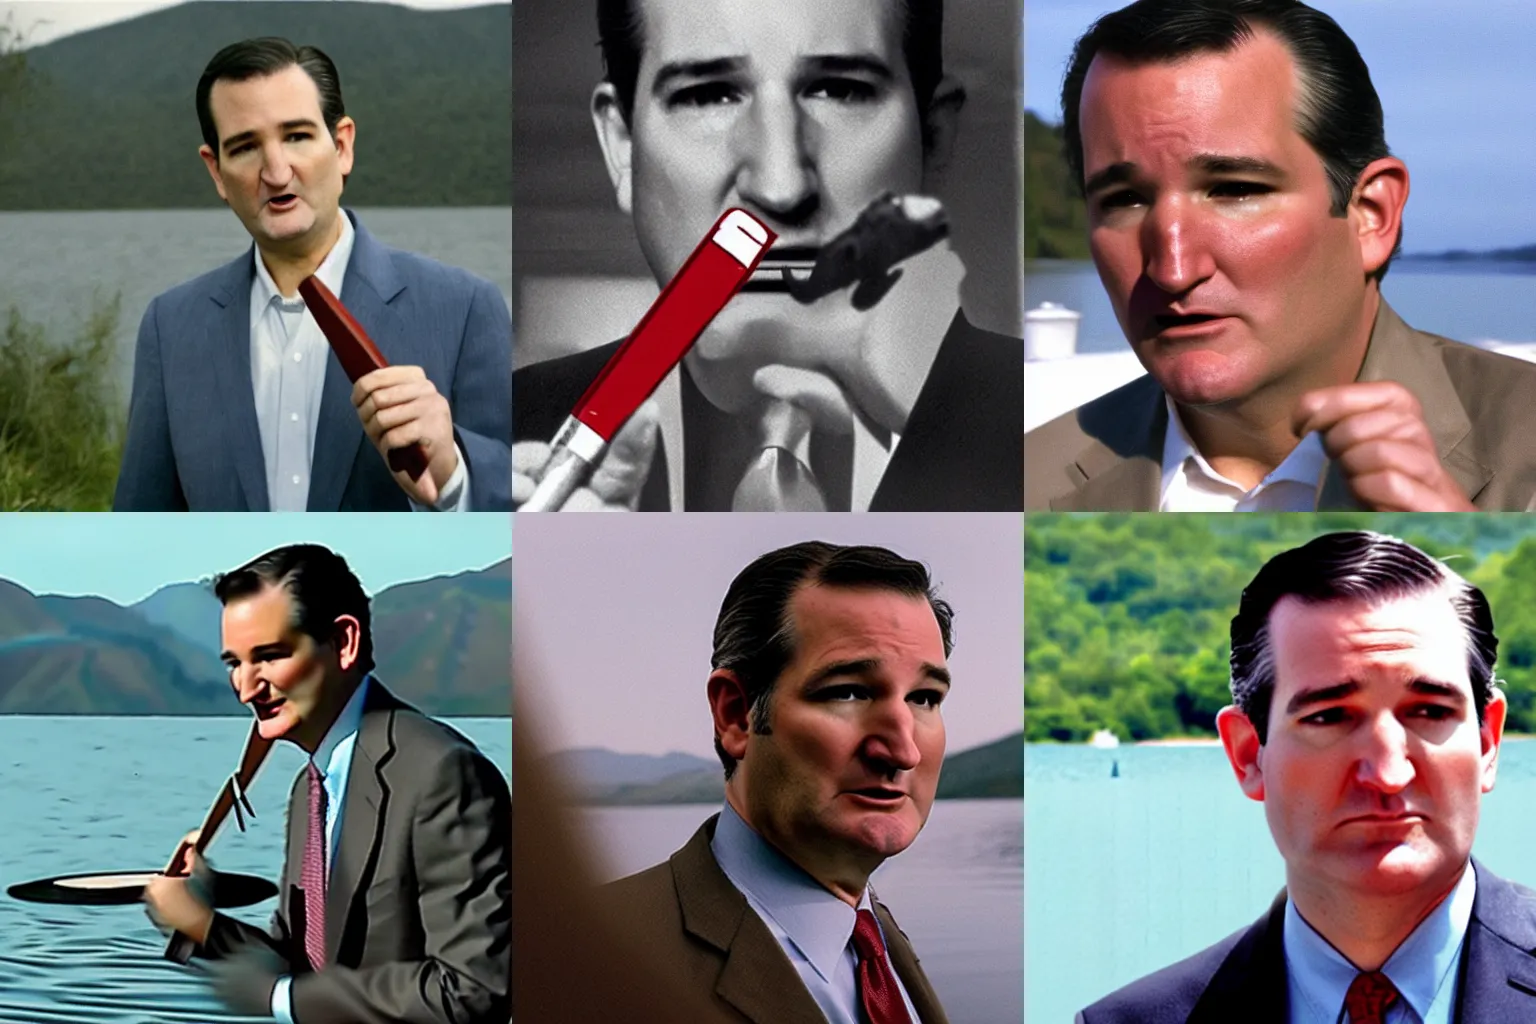 Prompt: Film still depicting Ted Cruz as the Zodiac Killer by a lake, holding a knife